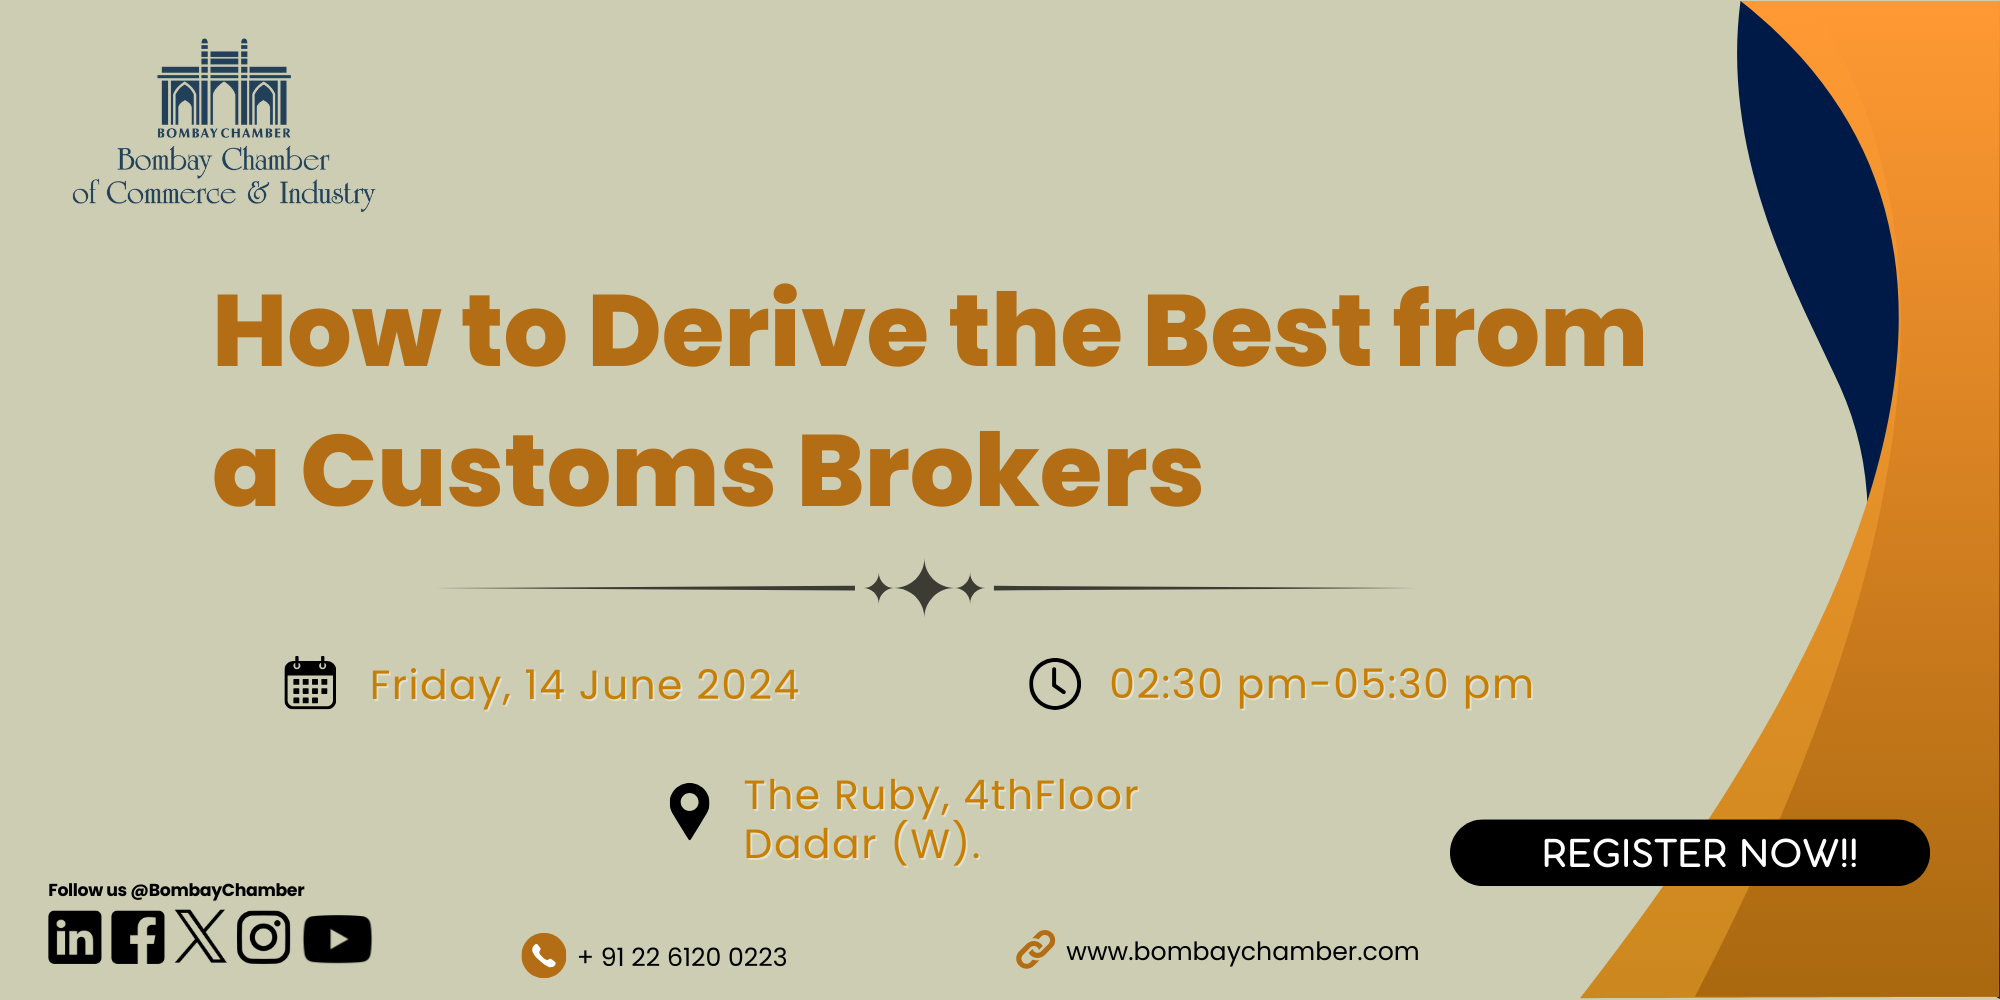 Seminar on “How to Derive the Best from a Customs Brokers”